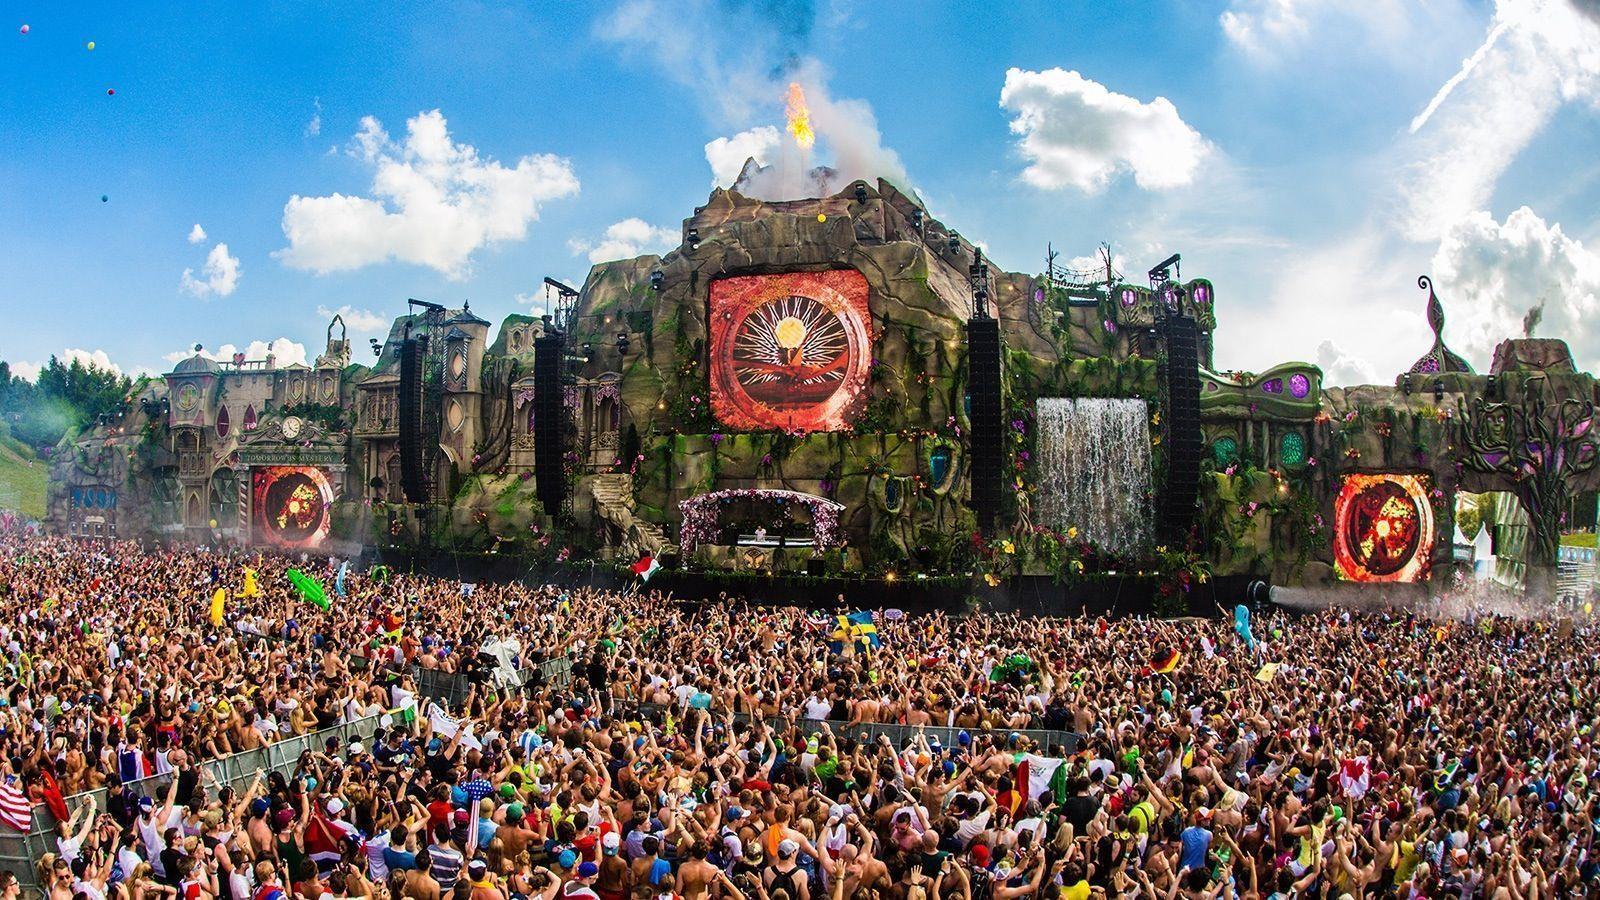 Tomorrowland gears up for 2015 festival with exciting announcement